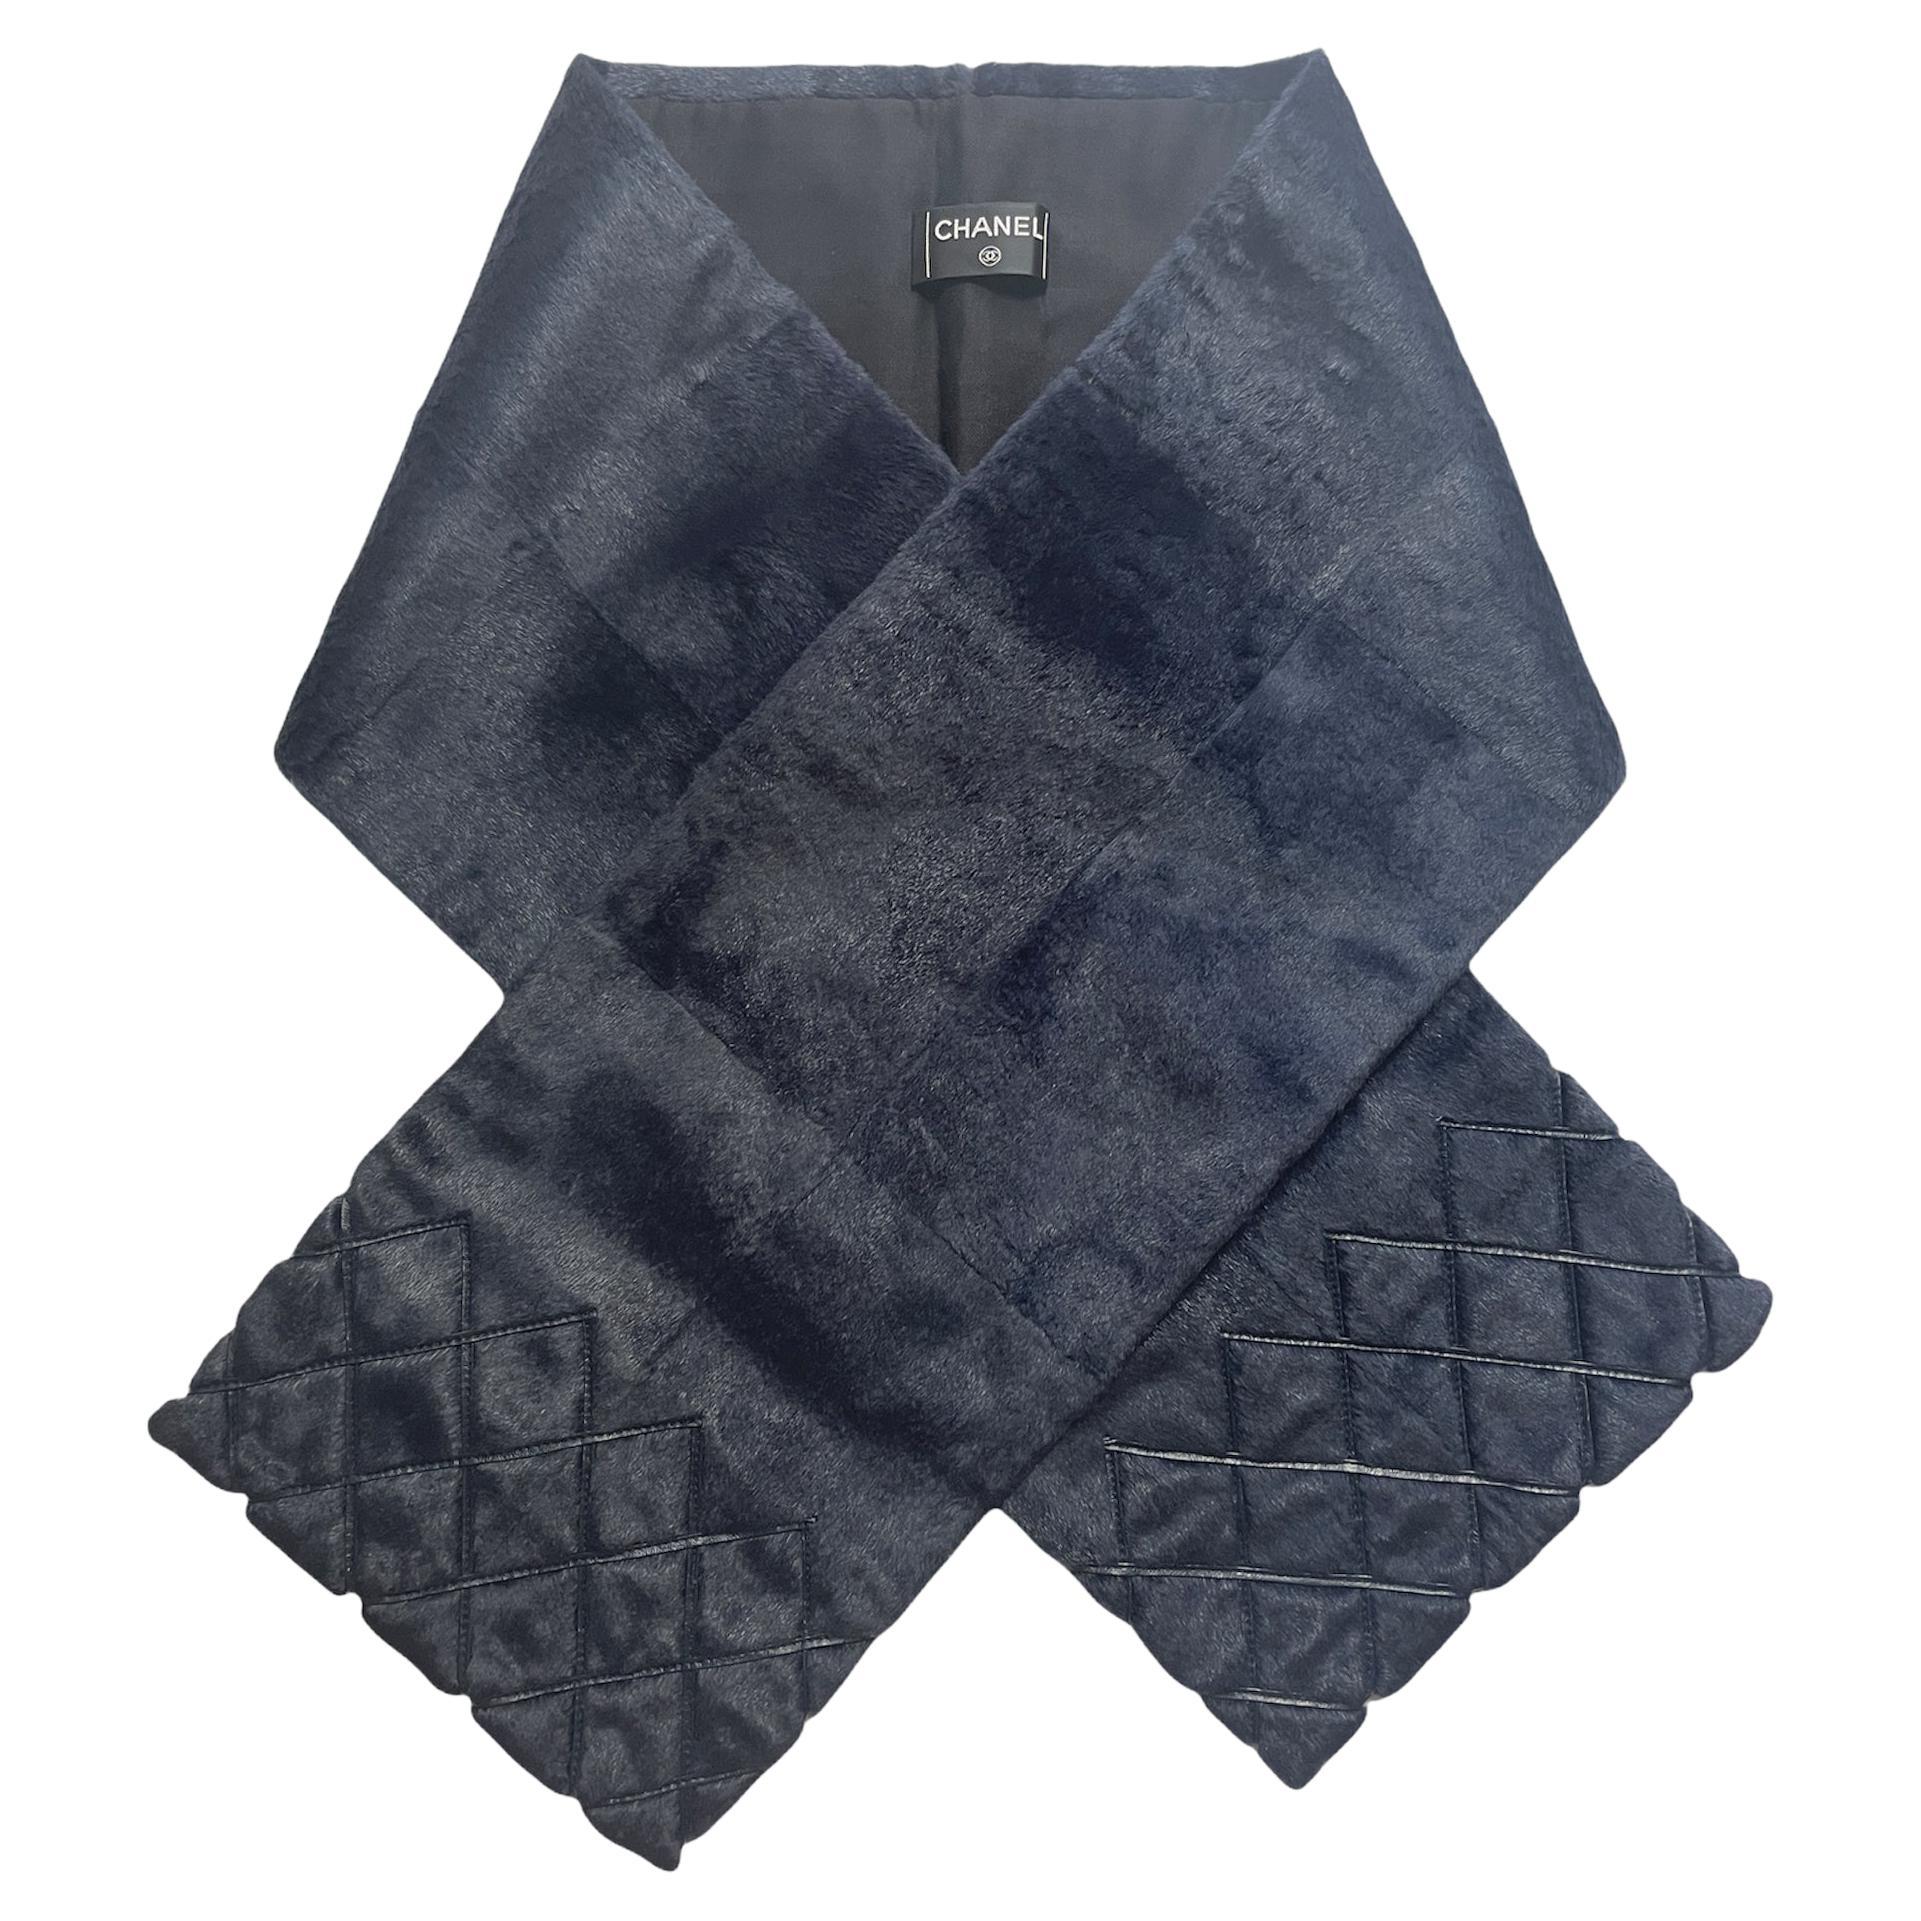 Chanel Navy Rabbit Fur Stole w/ Leather Quilted Stitching at Trim